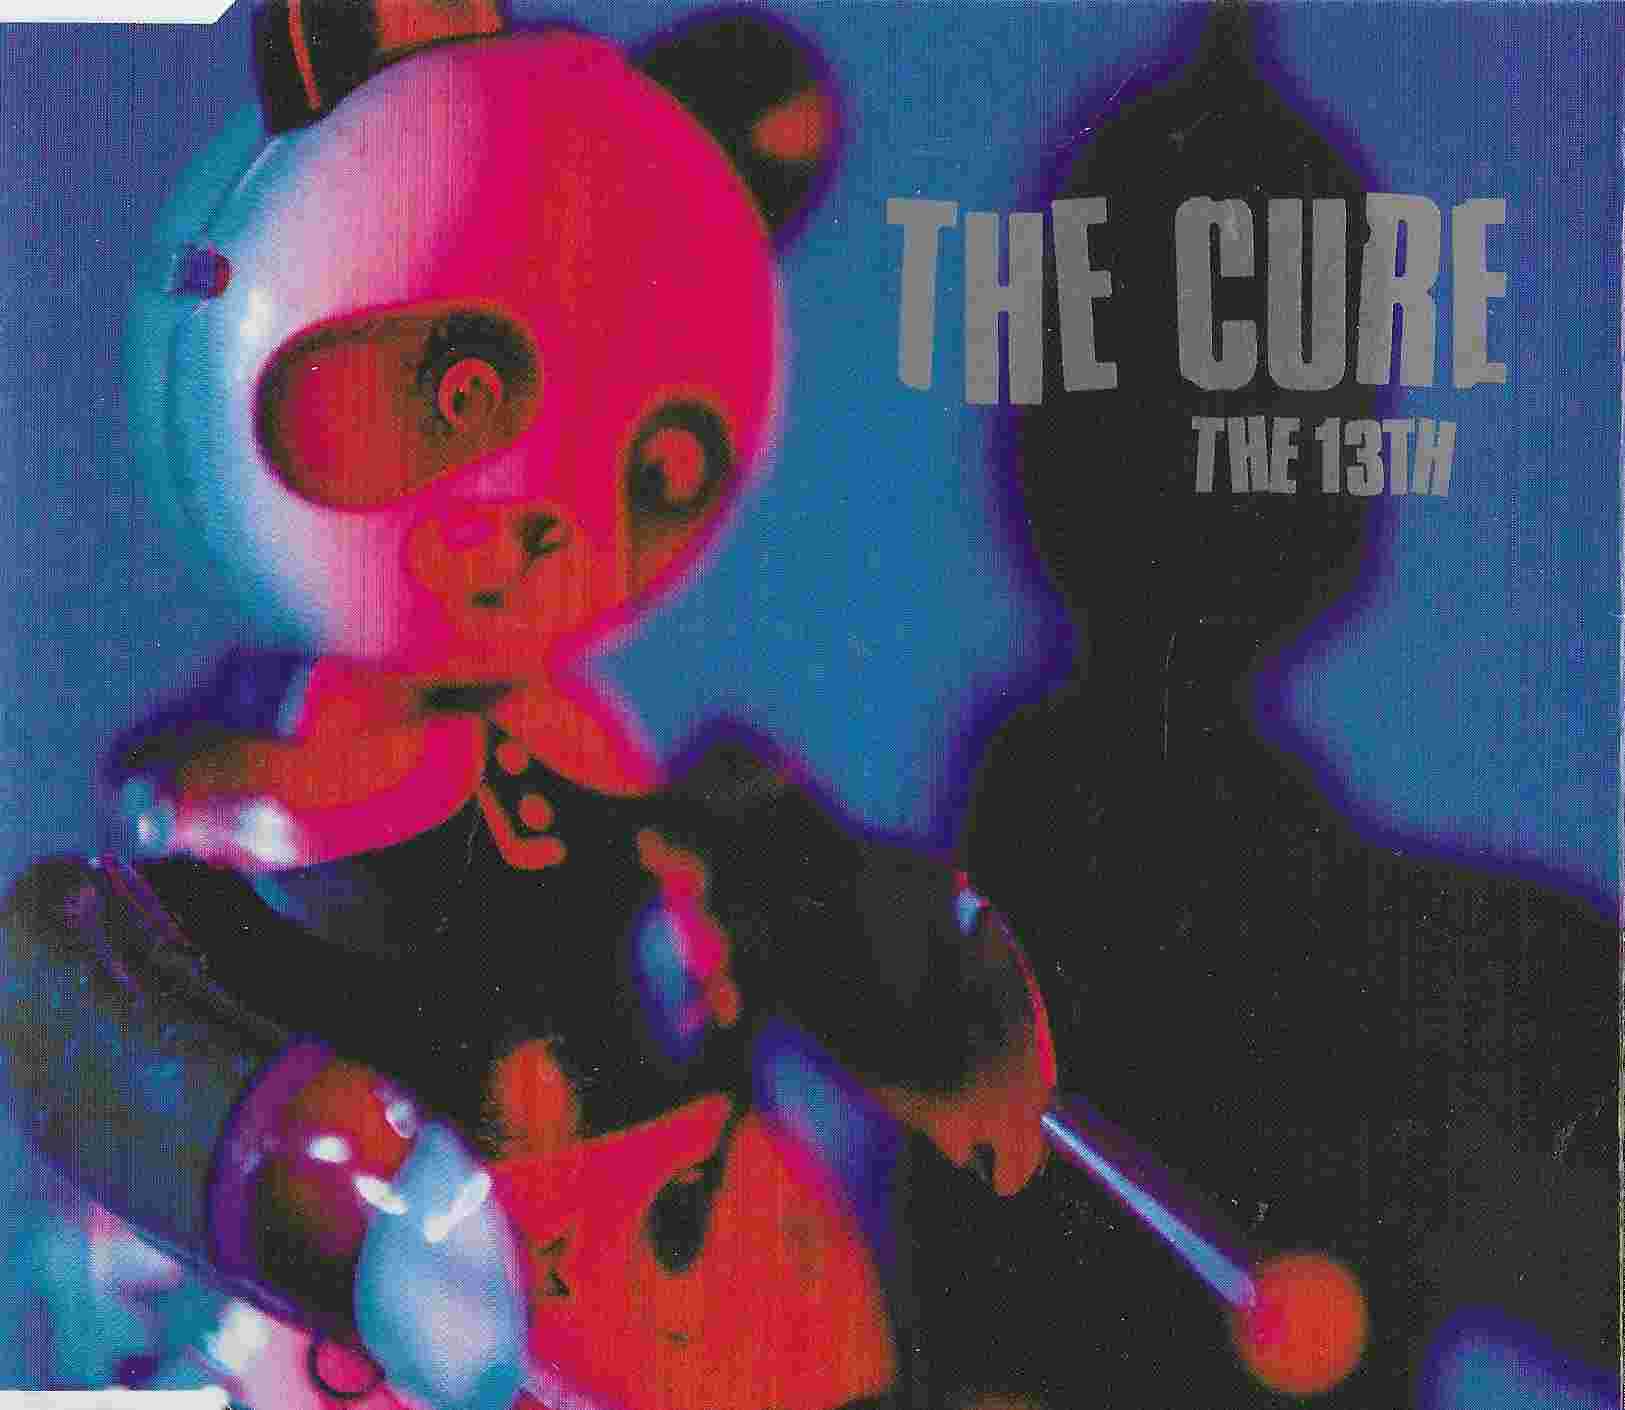 Picture of 576493 - 2 The 13th by artist The Cure